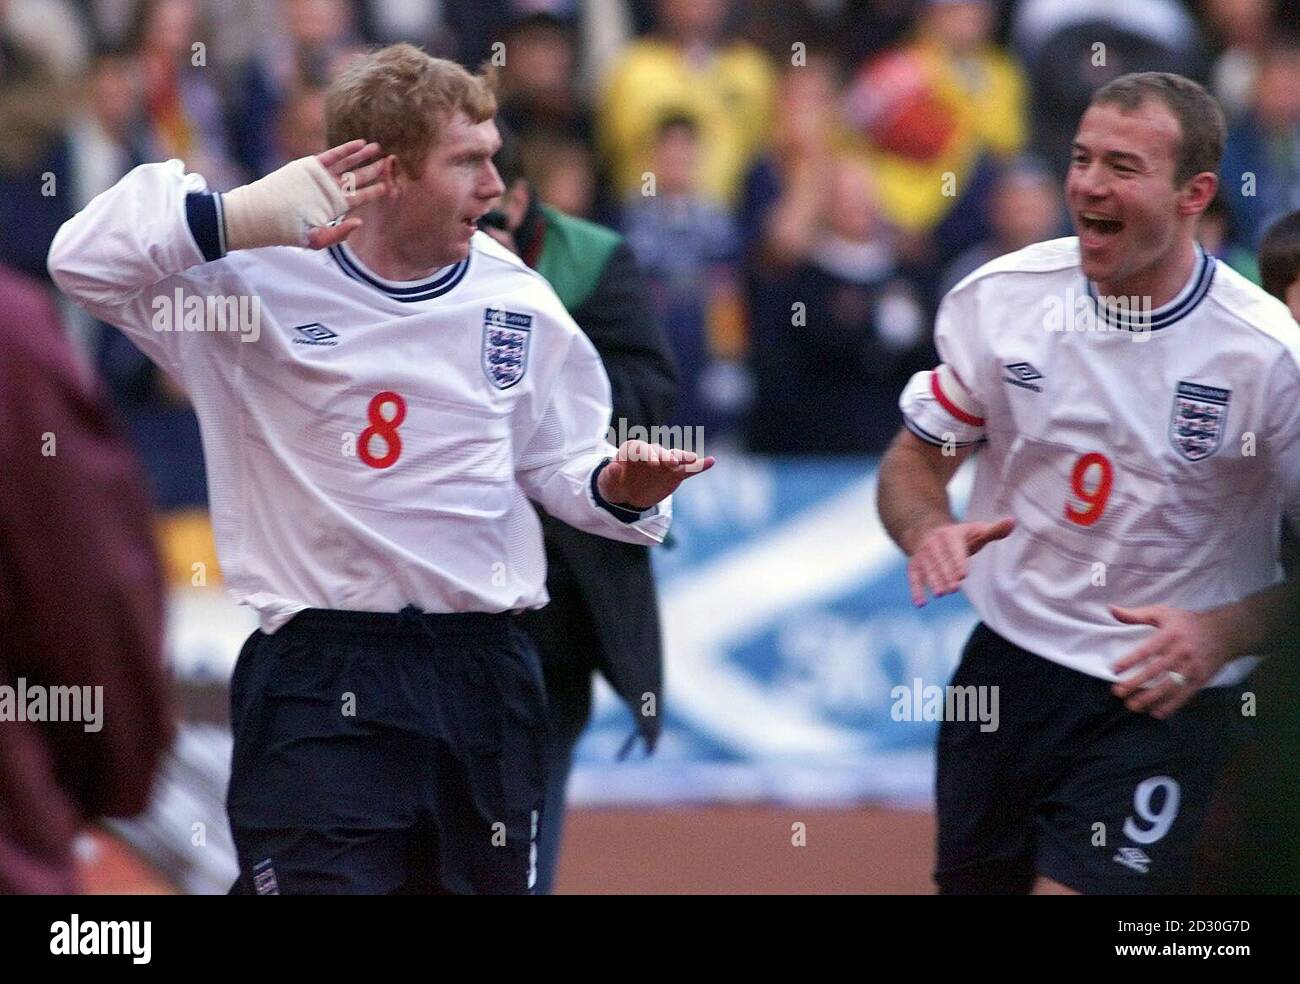 https://c8.alamy.com/comp/2D30G7D/this-picture-can-only-be-used-within-the-context-of-an-editorial-feature-englands-paul-scholes-l-celebrates-his-first-goal-with-captain-alan-shearer-during-the-euro-2000-football-match-between-england-and-scotland-at-hampden-park-final-score-scotland-0-england-2-2D30G7D.jpg